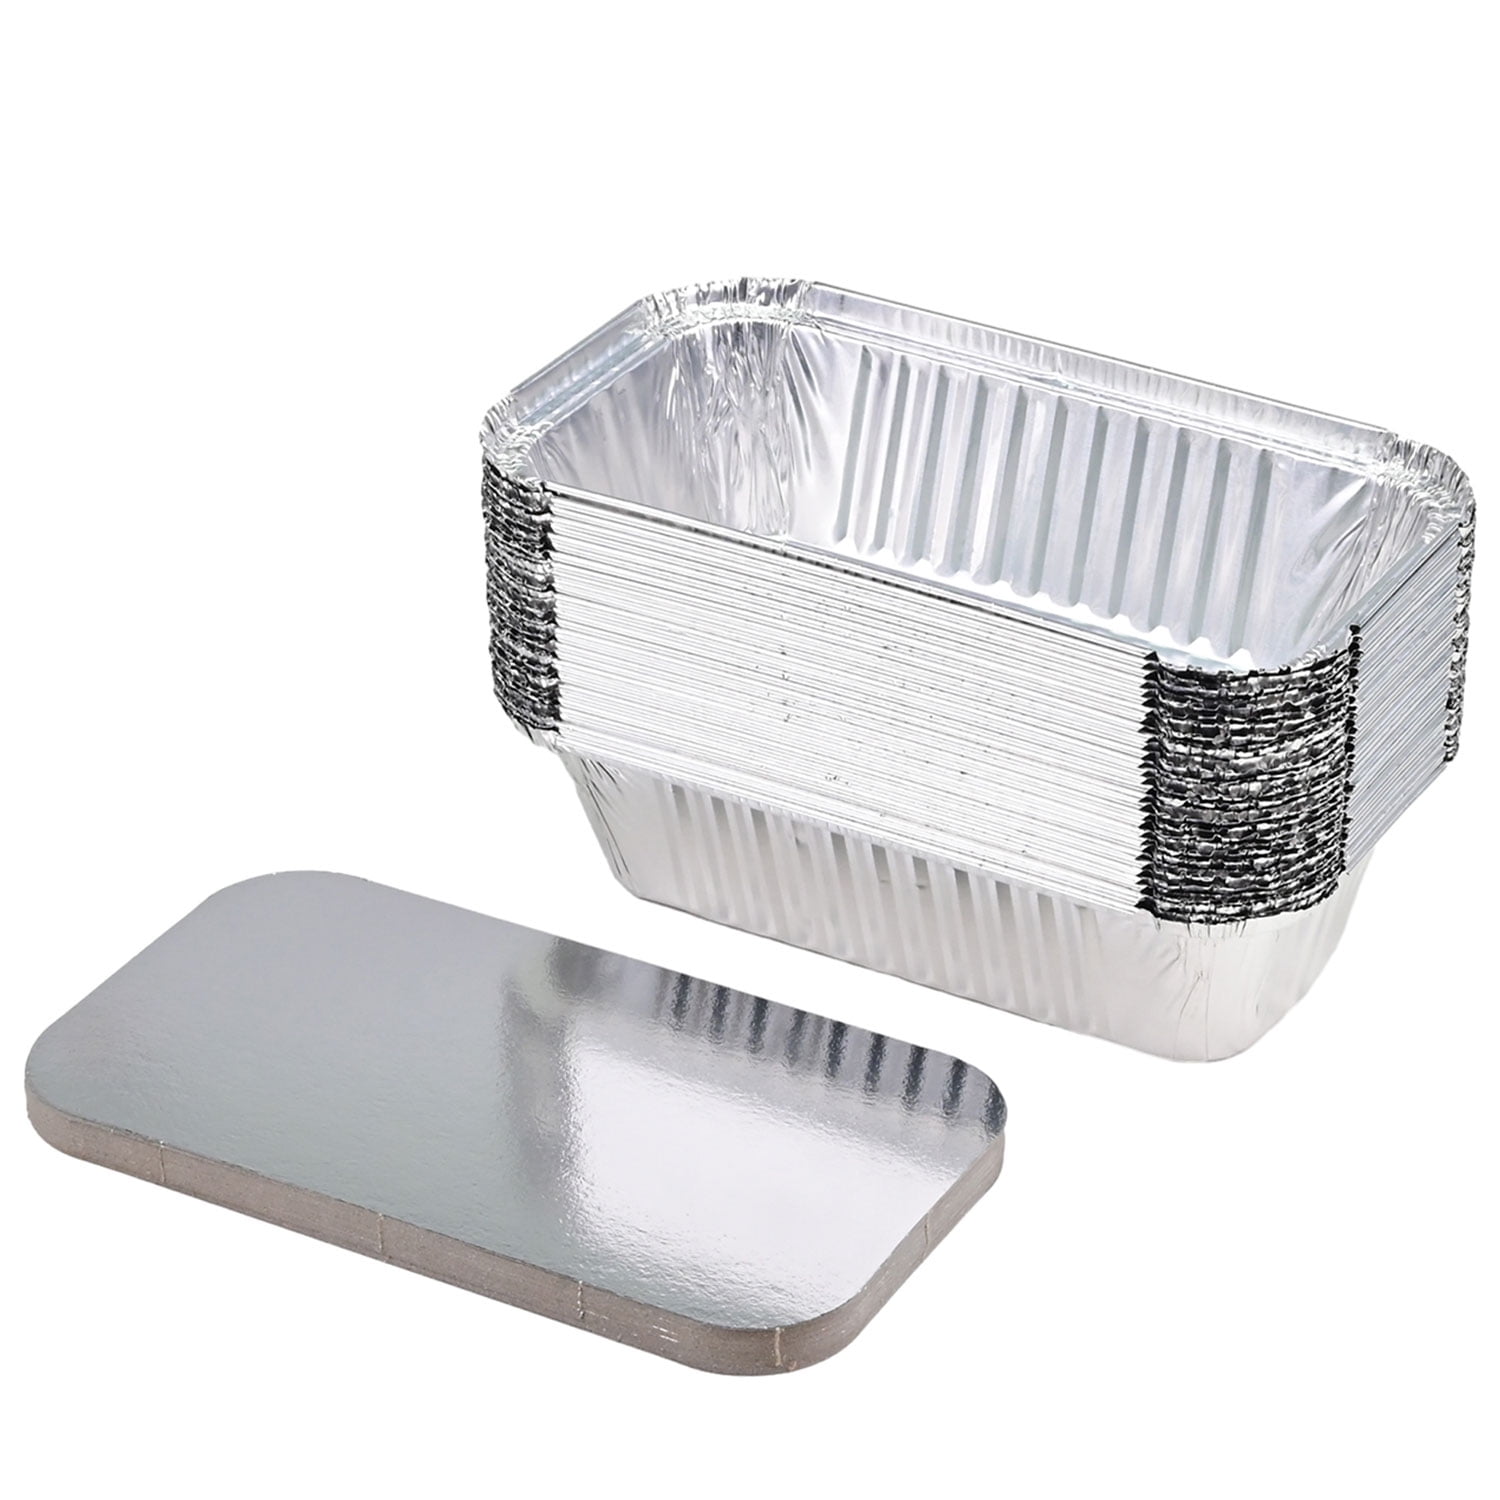 SINTOP Aluminum Bread Pans Disposable 8x4 Loaf Pans with Lids 50 Pack Dessert Boxes - Perfect for Baking, Storing, Takeout